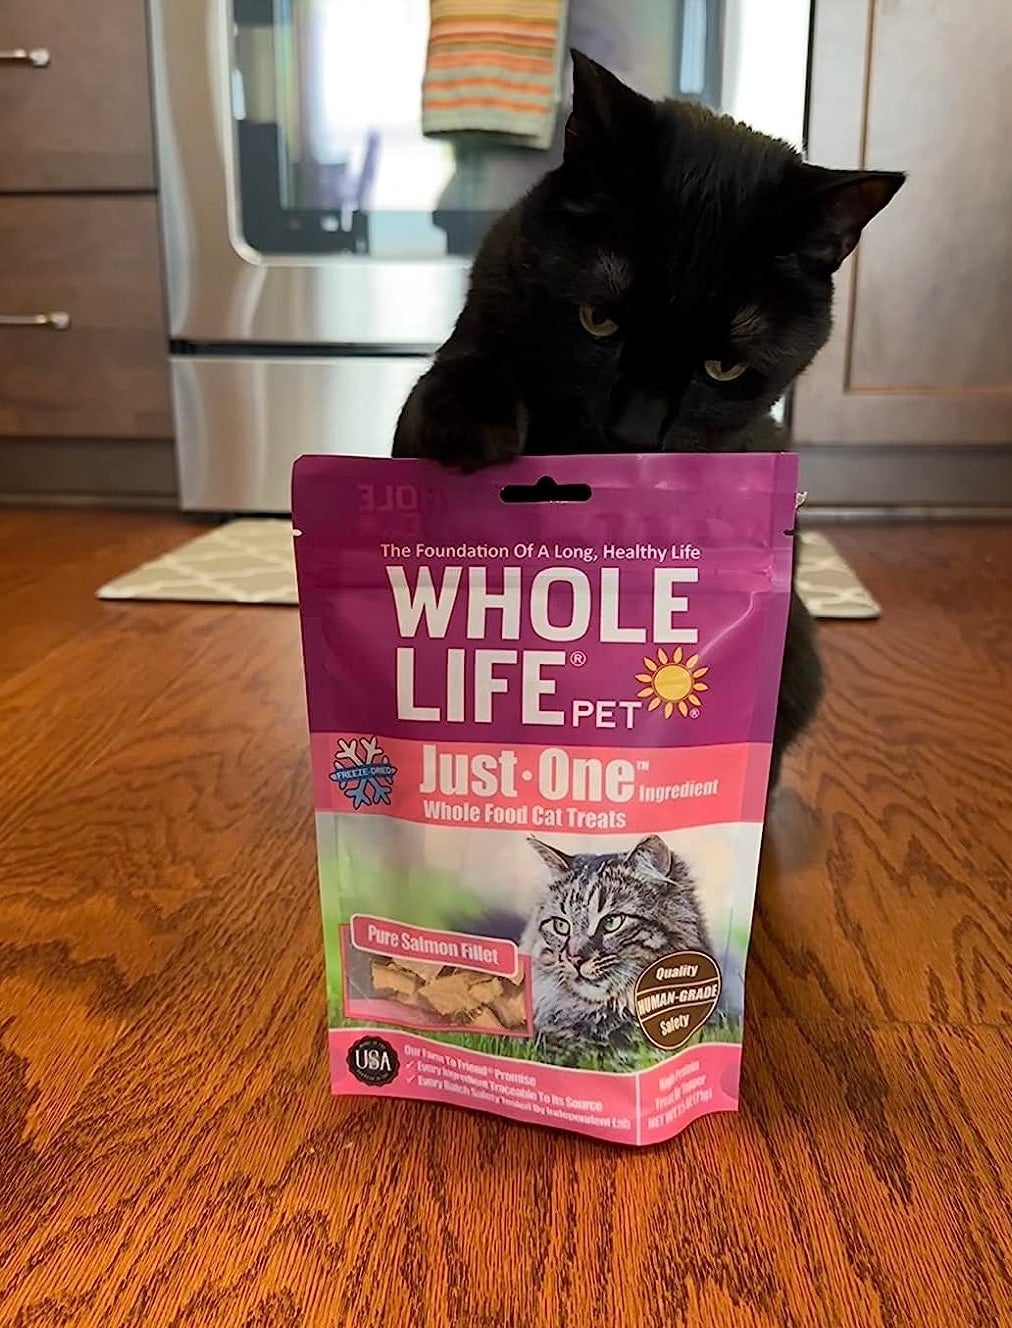 Image of cat with food bag